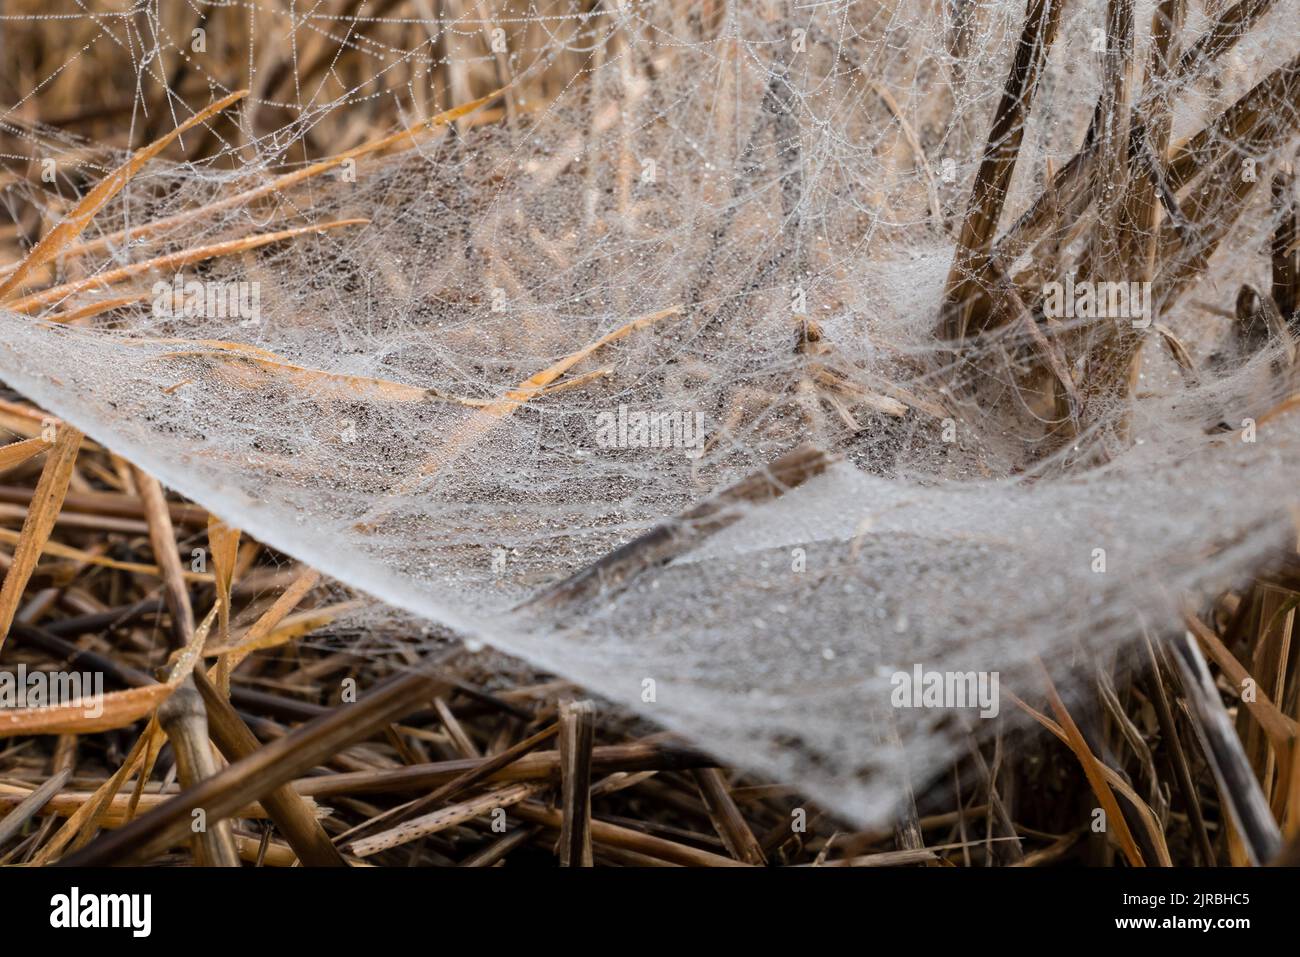 Morning Dew on the spider web. Closeup image, spider web on brown grass Stock Photo